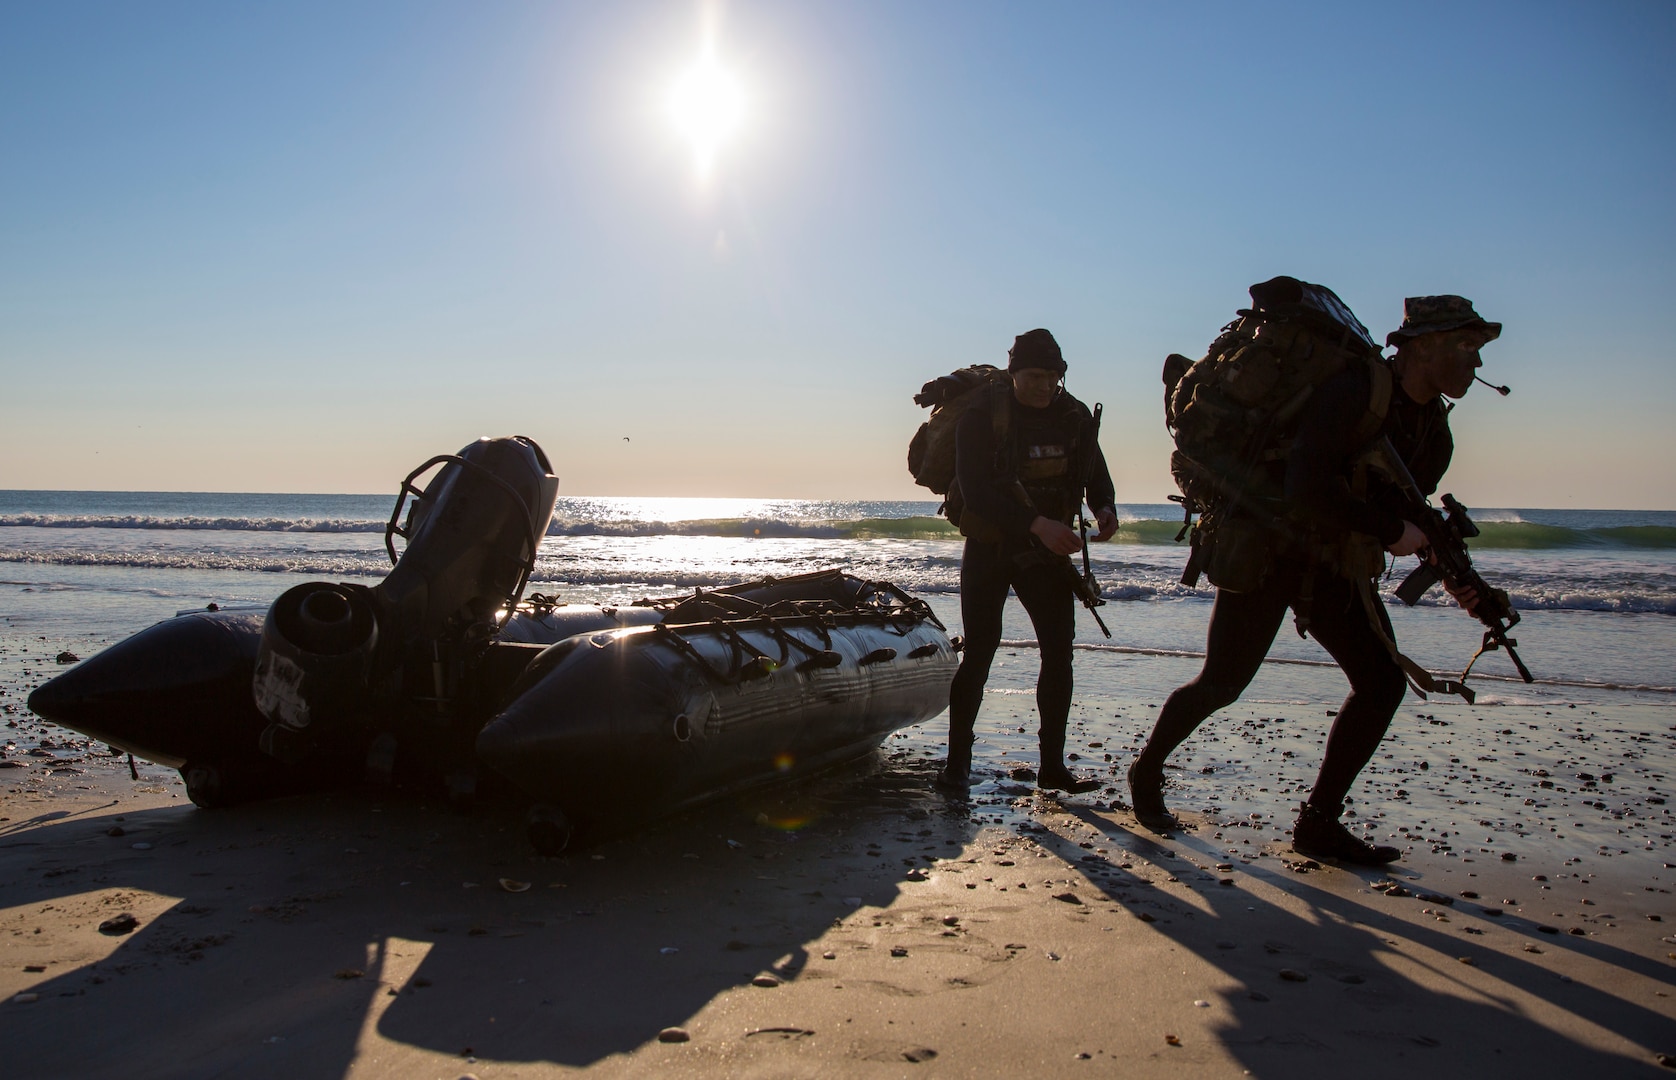 Marines with 2nd Reconnaissance Battalion, 2nd Marine Division, II Marine Expeditionary Force, during reconnaissance mission at Onslow Beach, North
Carolina, in support of exercise Bold Alligator 14, November 4, 2014 (U.S. Marine Corps/Paul Peterson)